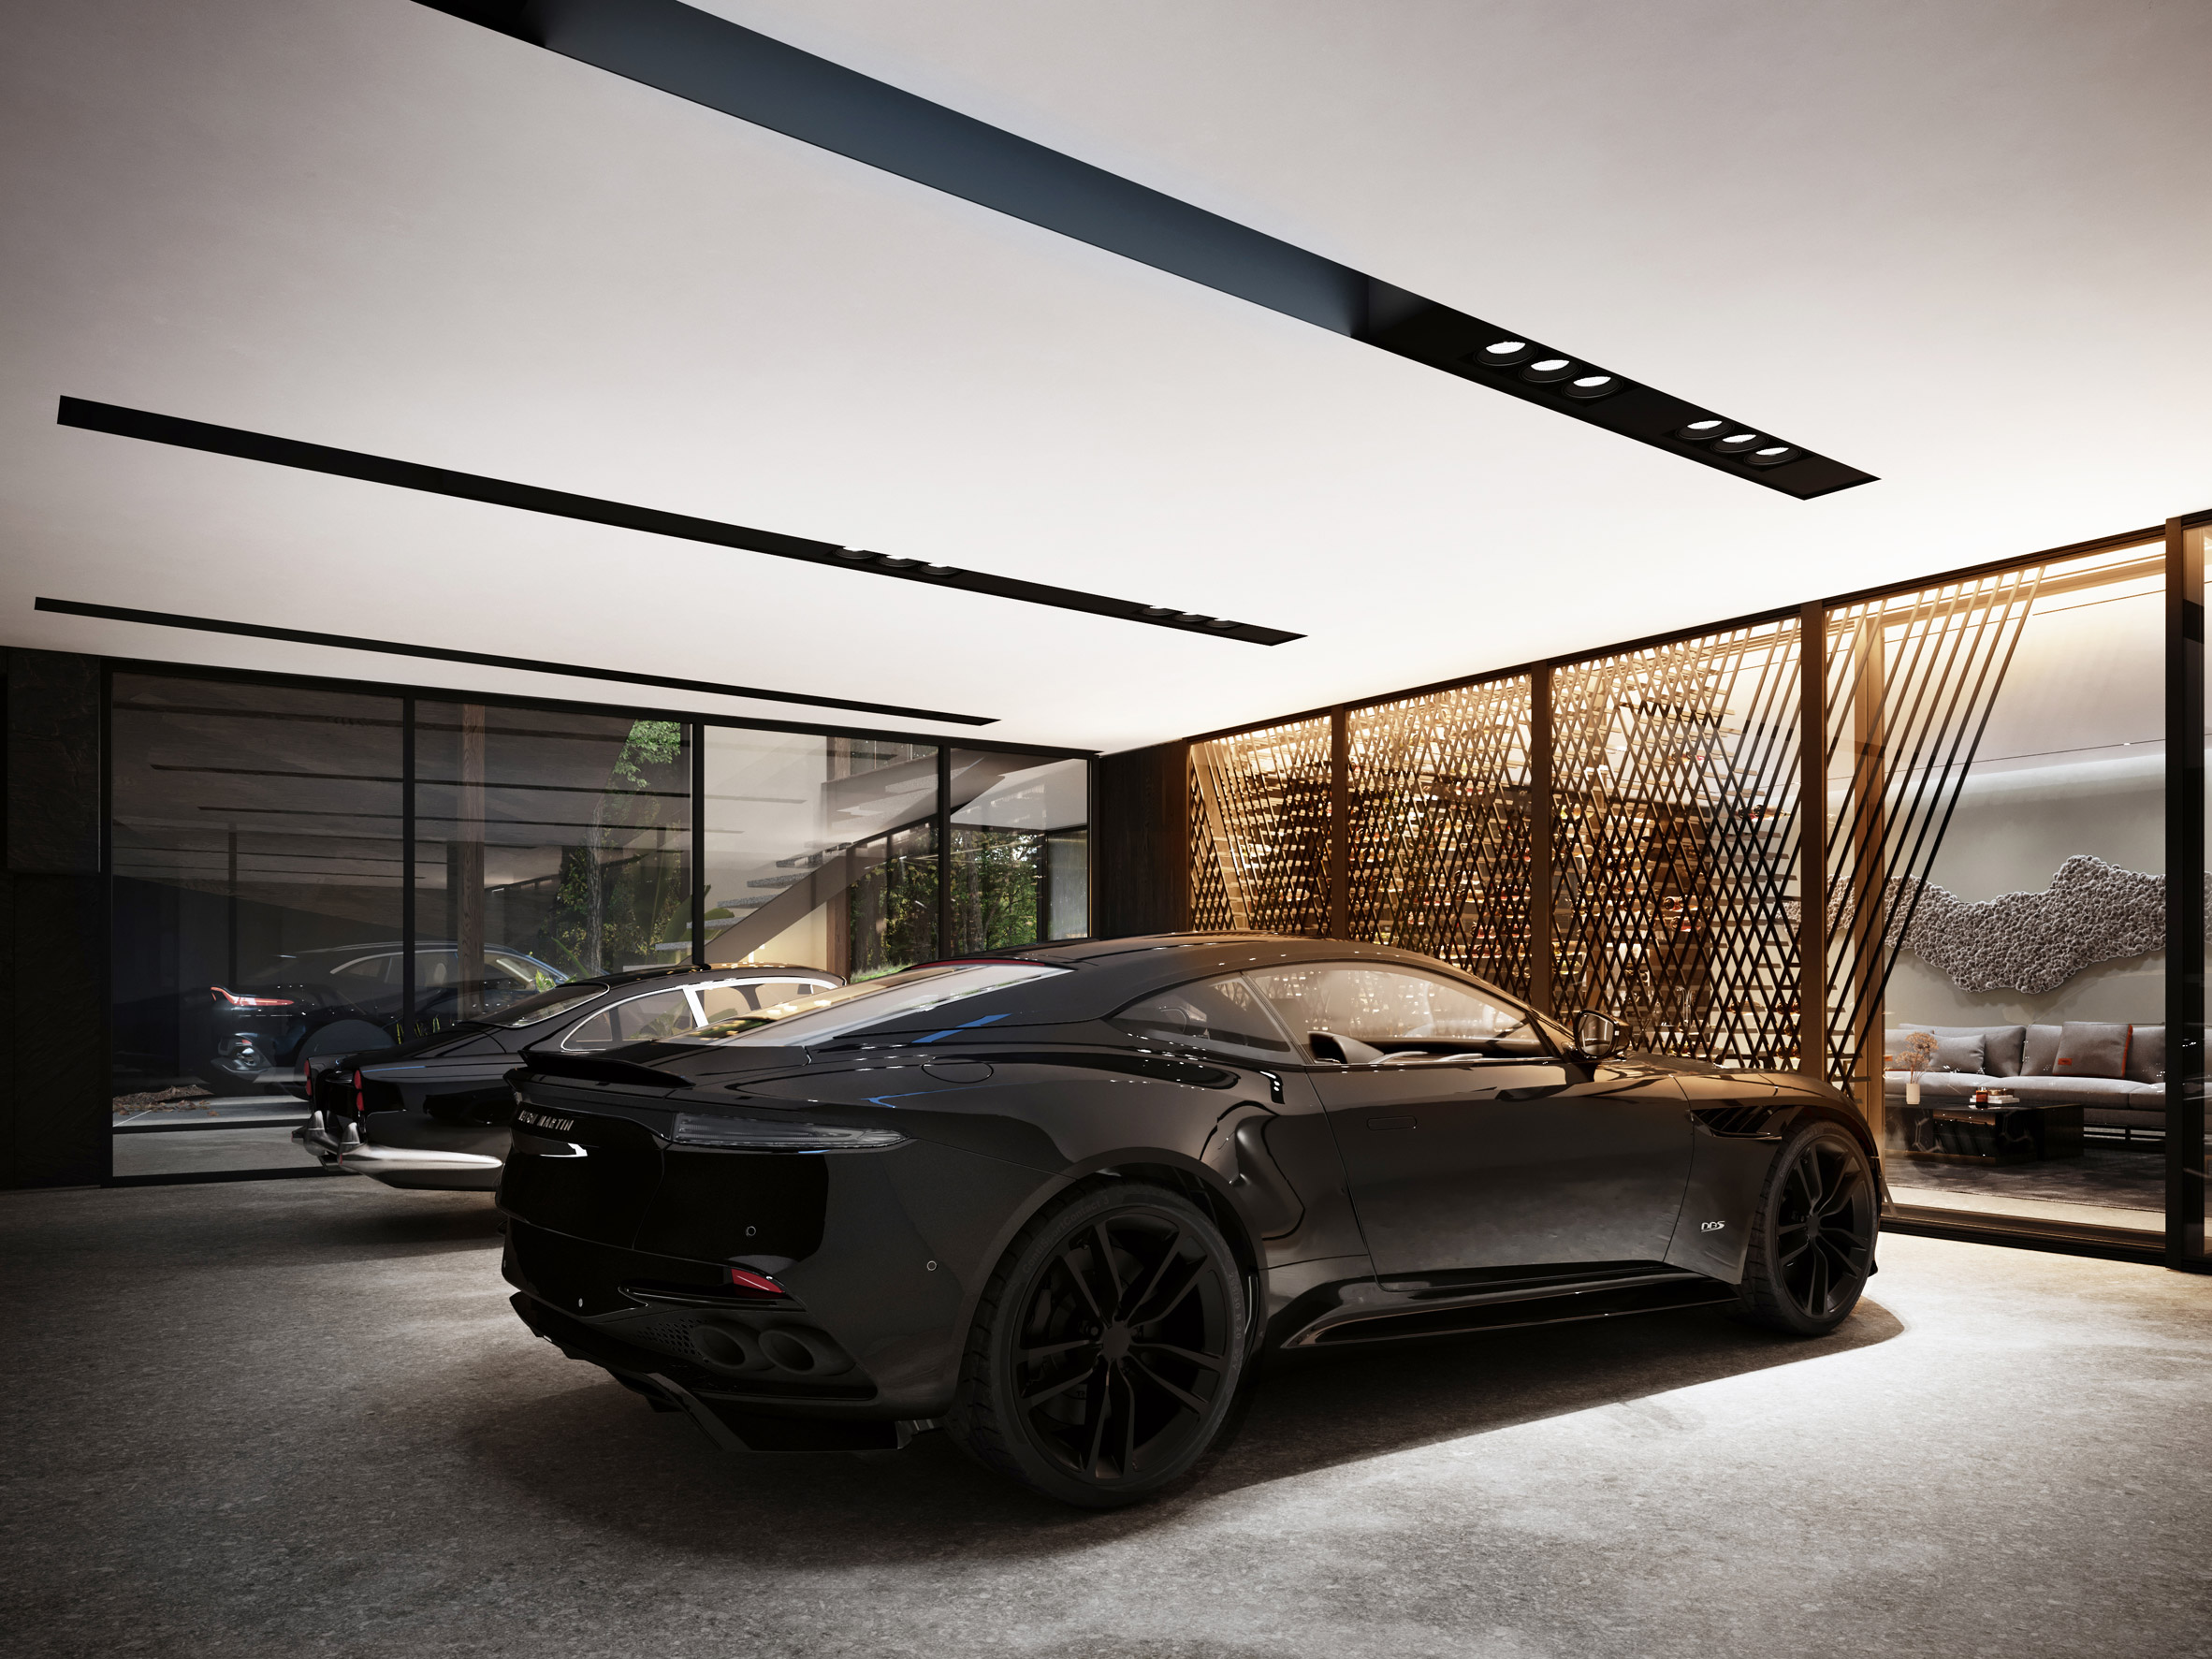 Garage of Sylvan Rock house by S3 Architecture and Aston Martin